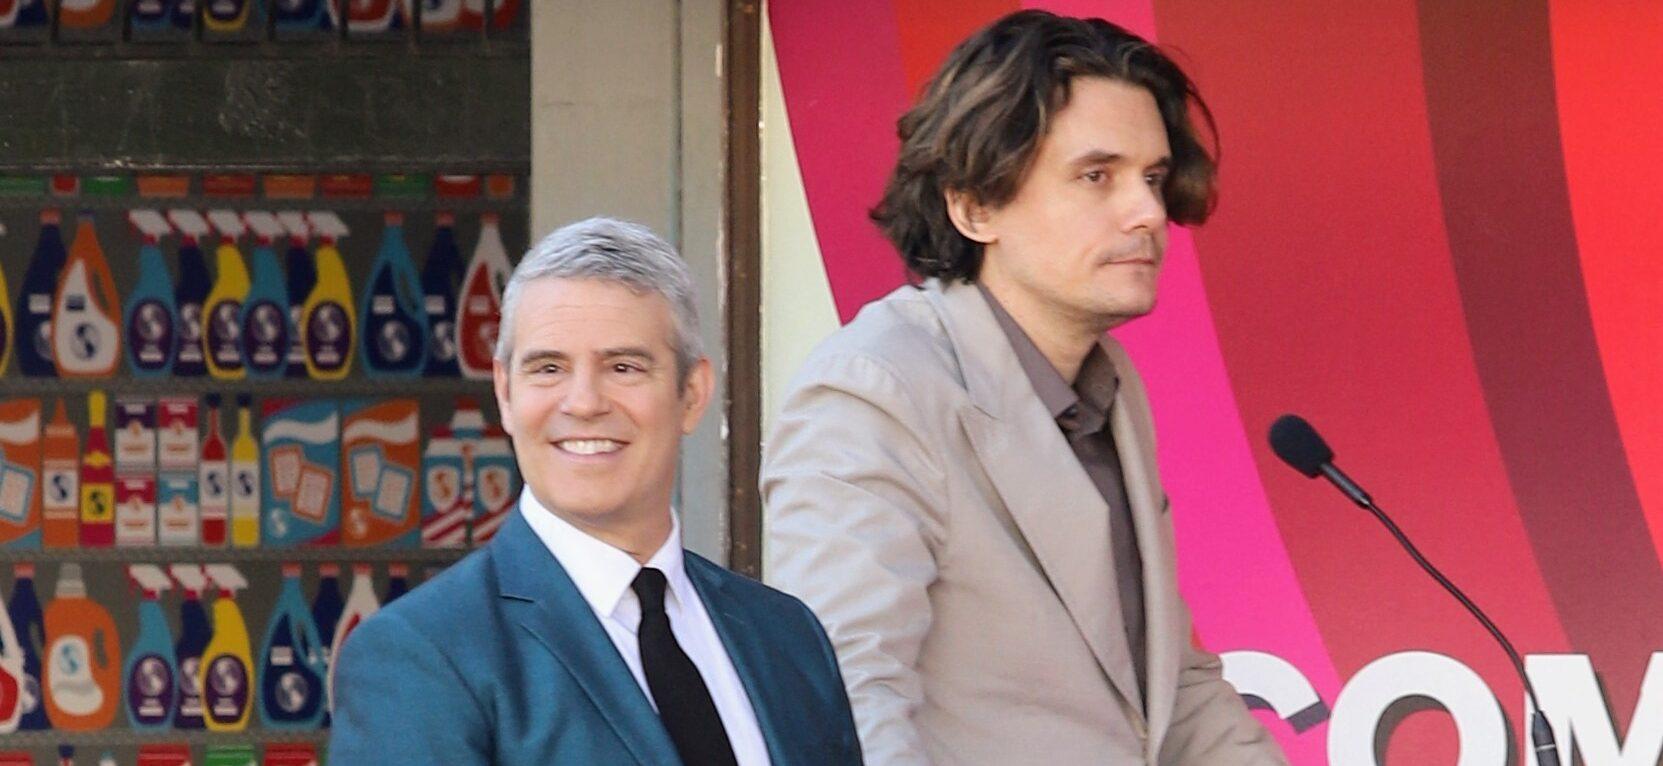 Andy Cohen joined by John Mayer as he gets his Hollywood Star in the Walk of Fame with celebrity guests